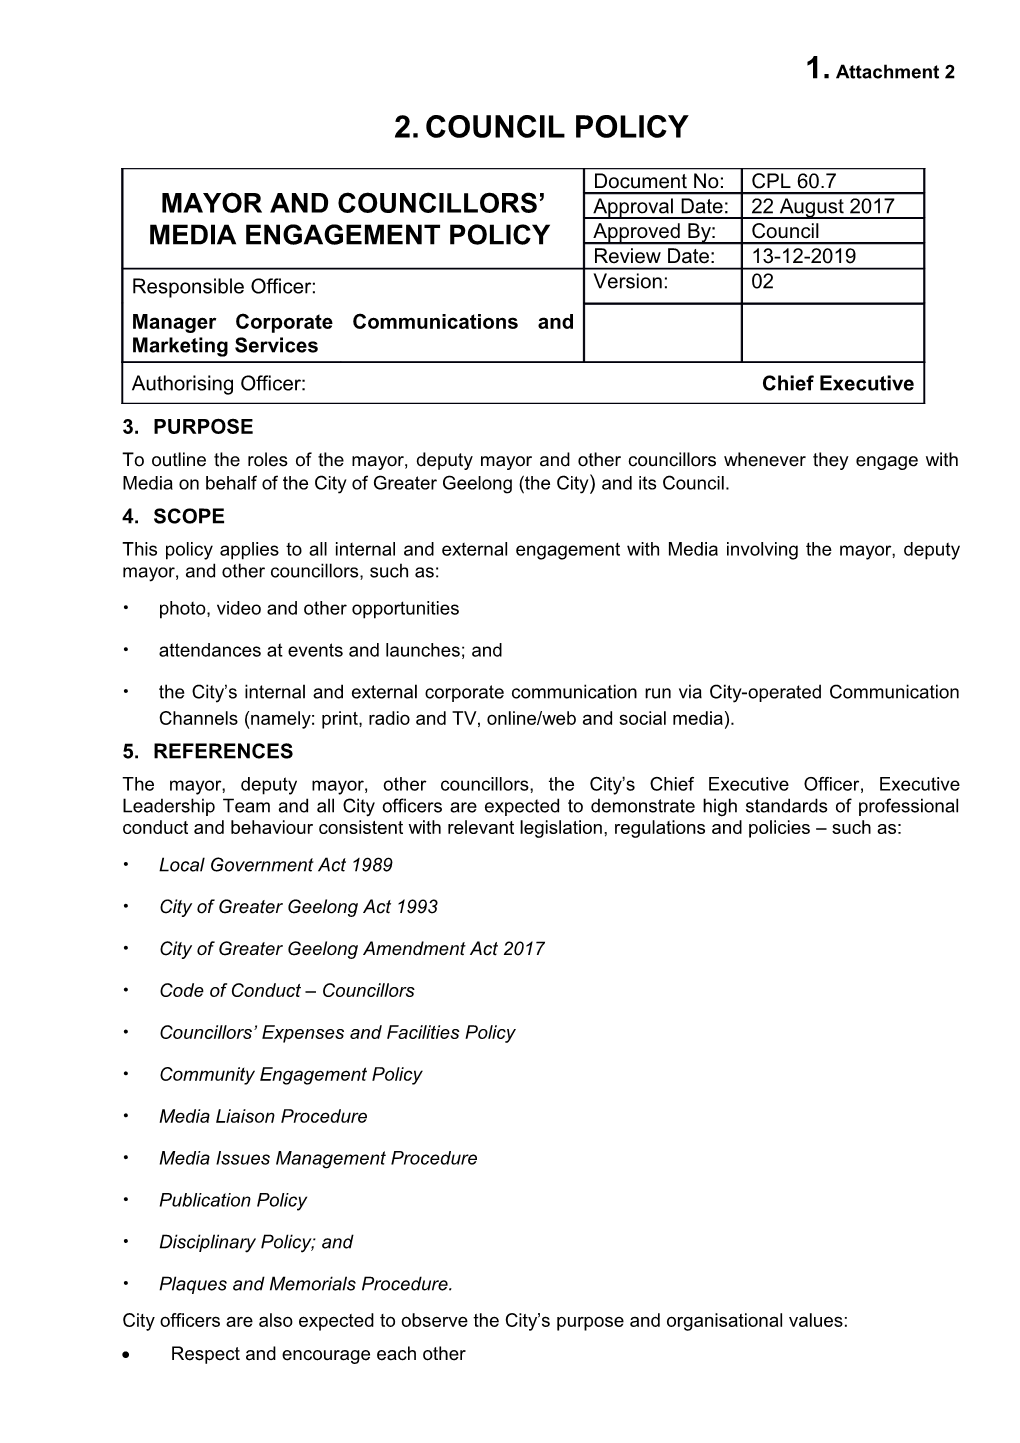 Mayor and Councillors' Media Engagement Policy